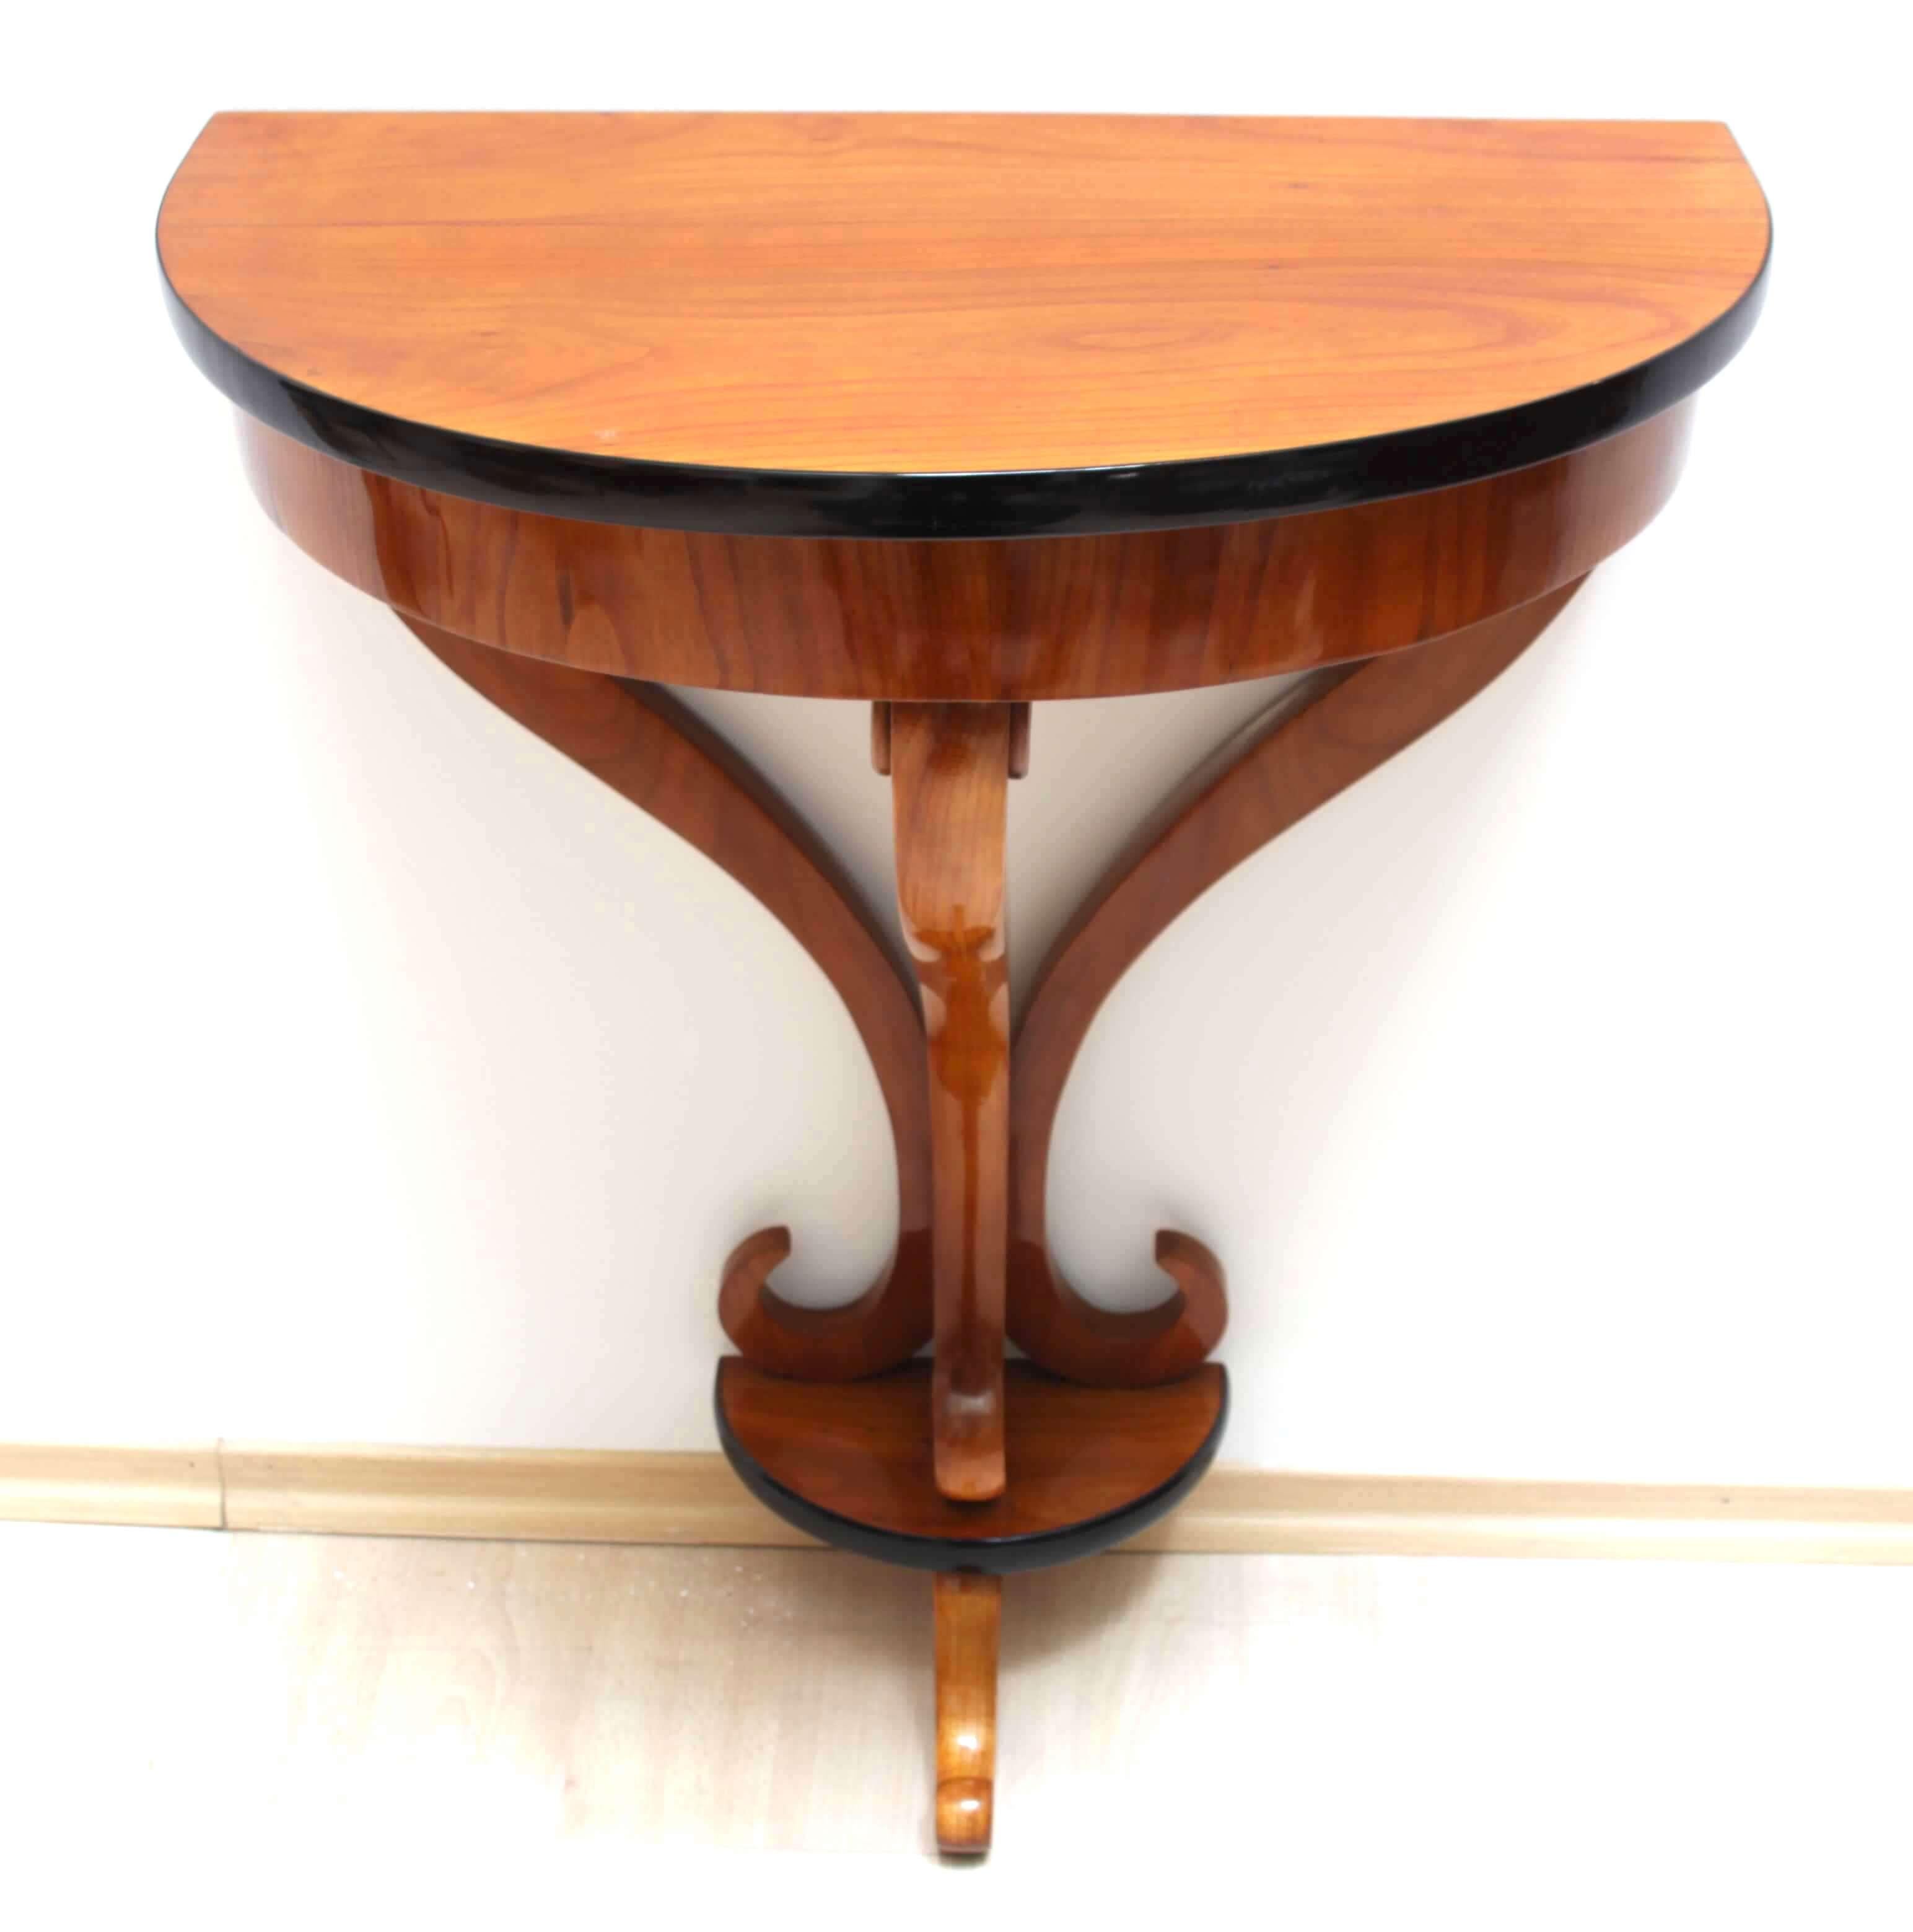 Beautiful neoclassical Biedermeier demilune (Half Moon) console table from South Germany, circa 1830.

Beautiful bright and friendly cherry veneer and solid wood, hand polished with shellac (french polished) and ebonized (black polished) edges.